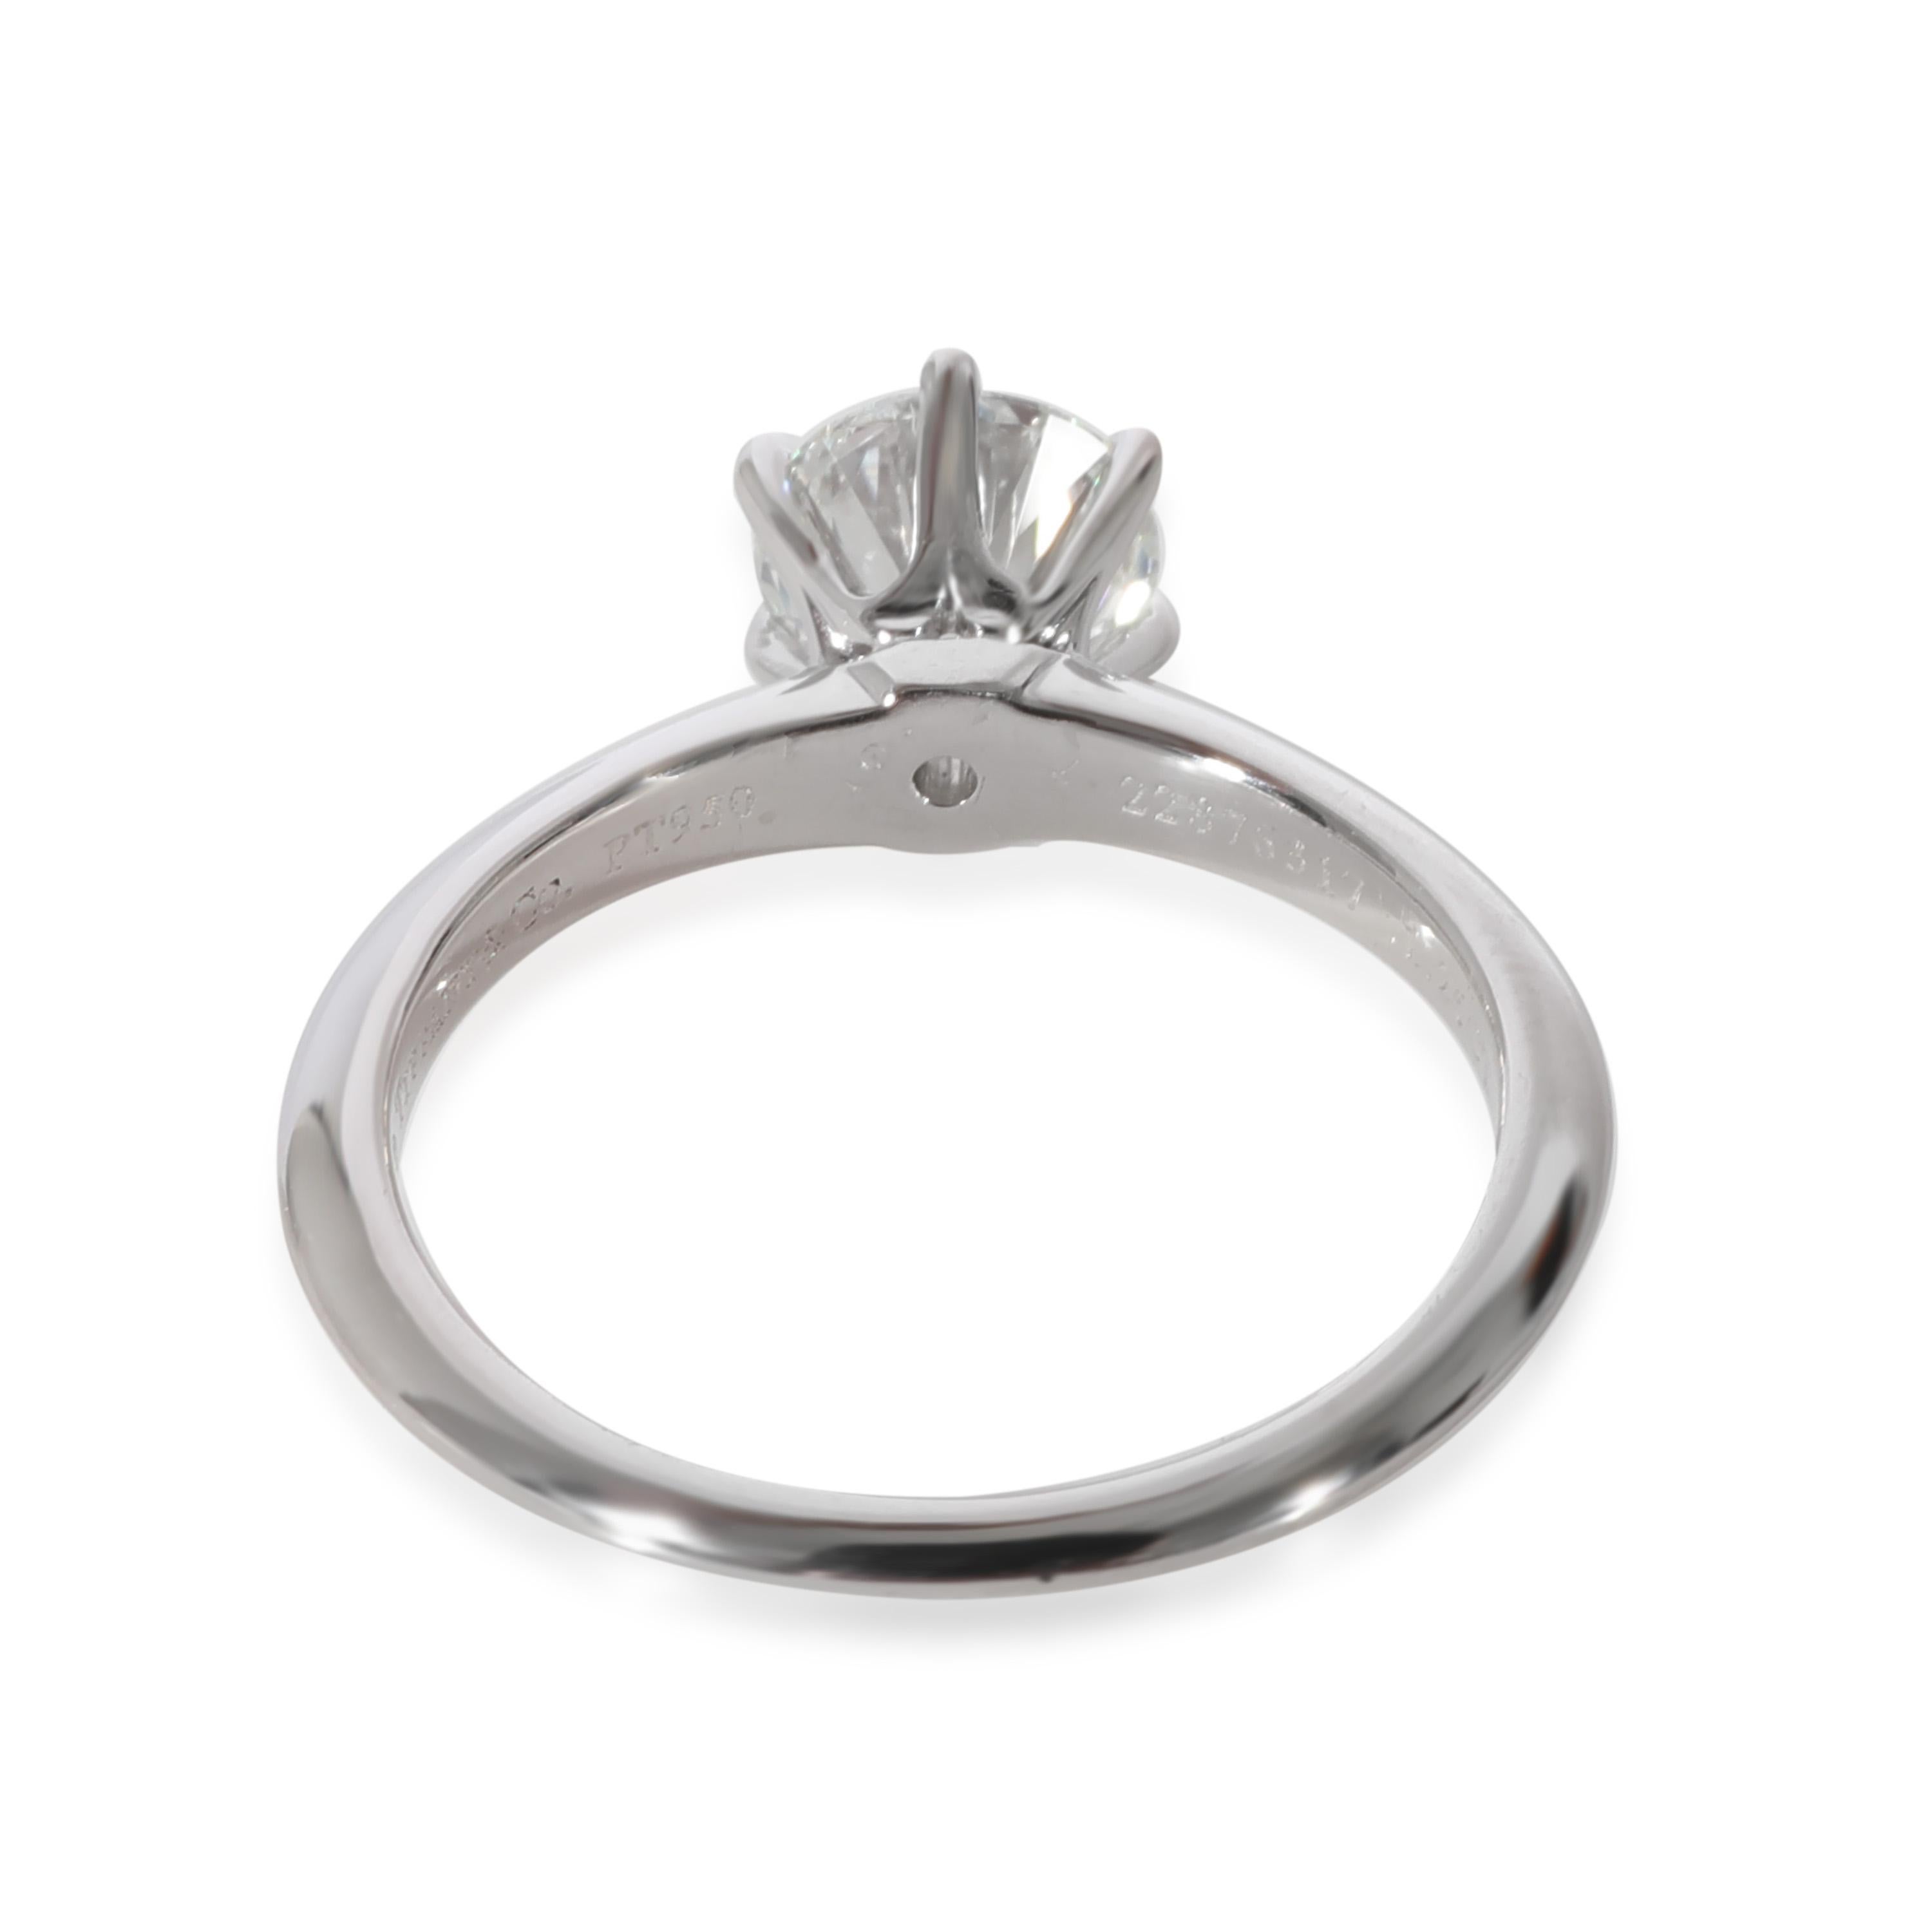 Tiffany & Co. Diamond Engagement Ring in Platinum F VS1 1.26 CTW

PRIMARY DETAILS
SKU: 128037
Listing Title: Tiffany & Co. Diamond Engagement Ring in Platinum F VS1 1.26 CTW
Condition Description: Retails for 23100 USD. In excellent condition and